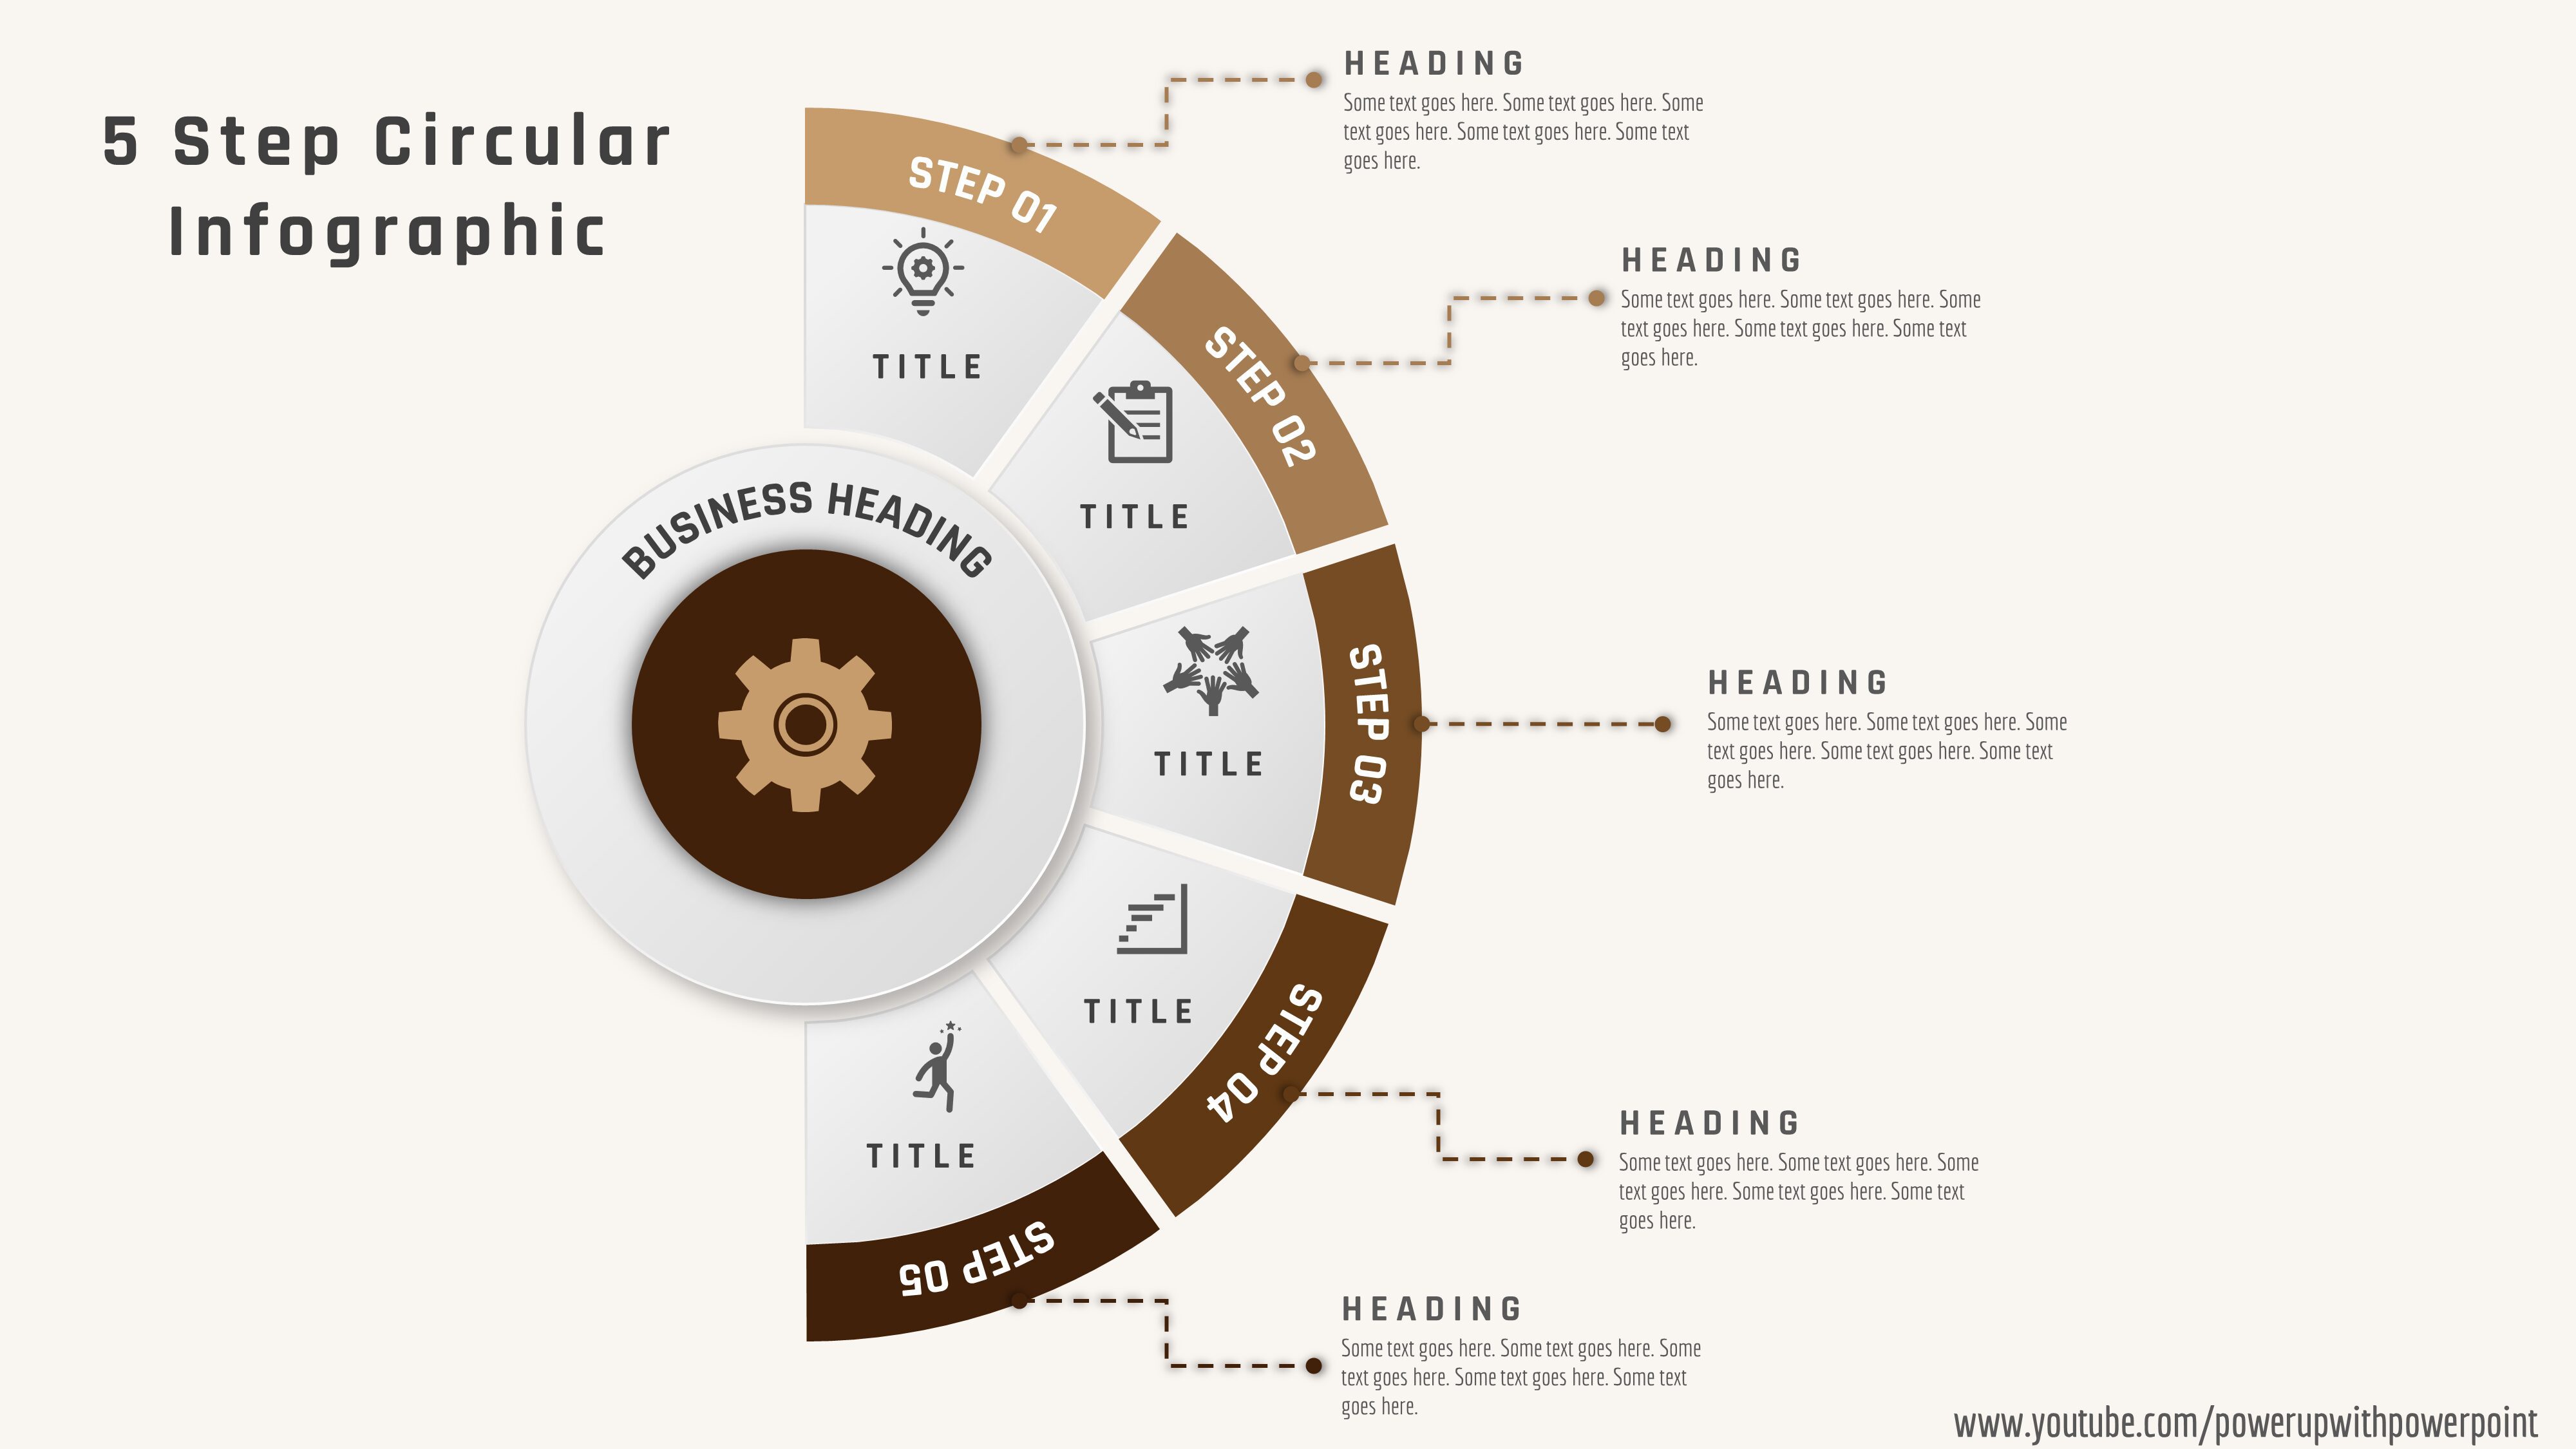 Download Powerpoint 5 Step Circular Infographic 82 Powerup With Powerpoint 4327